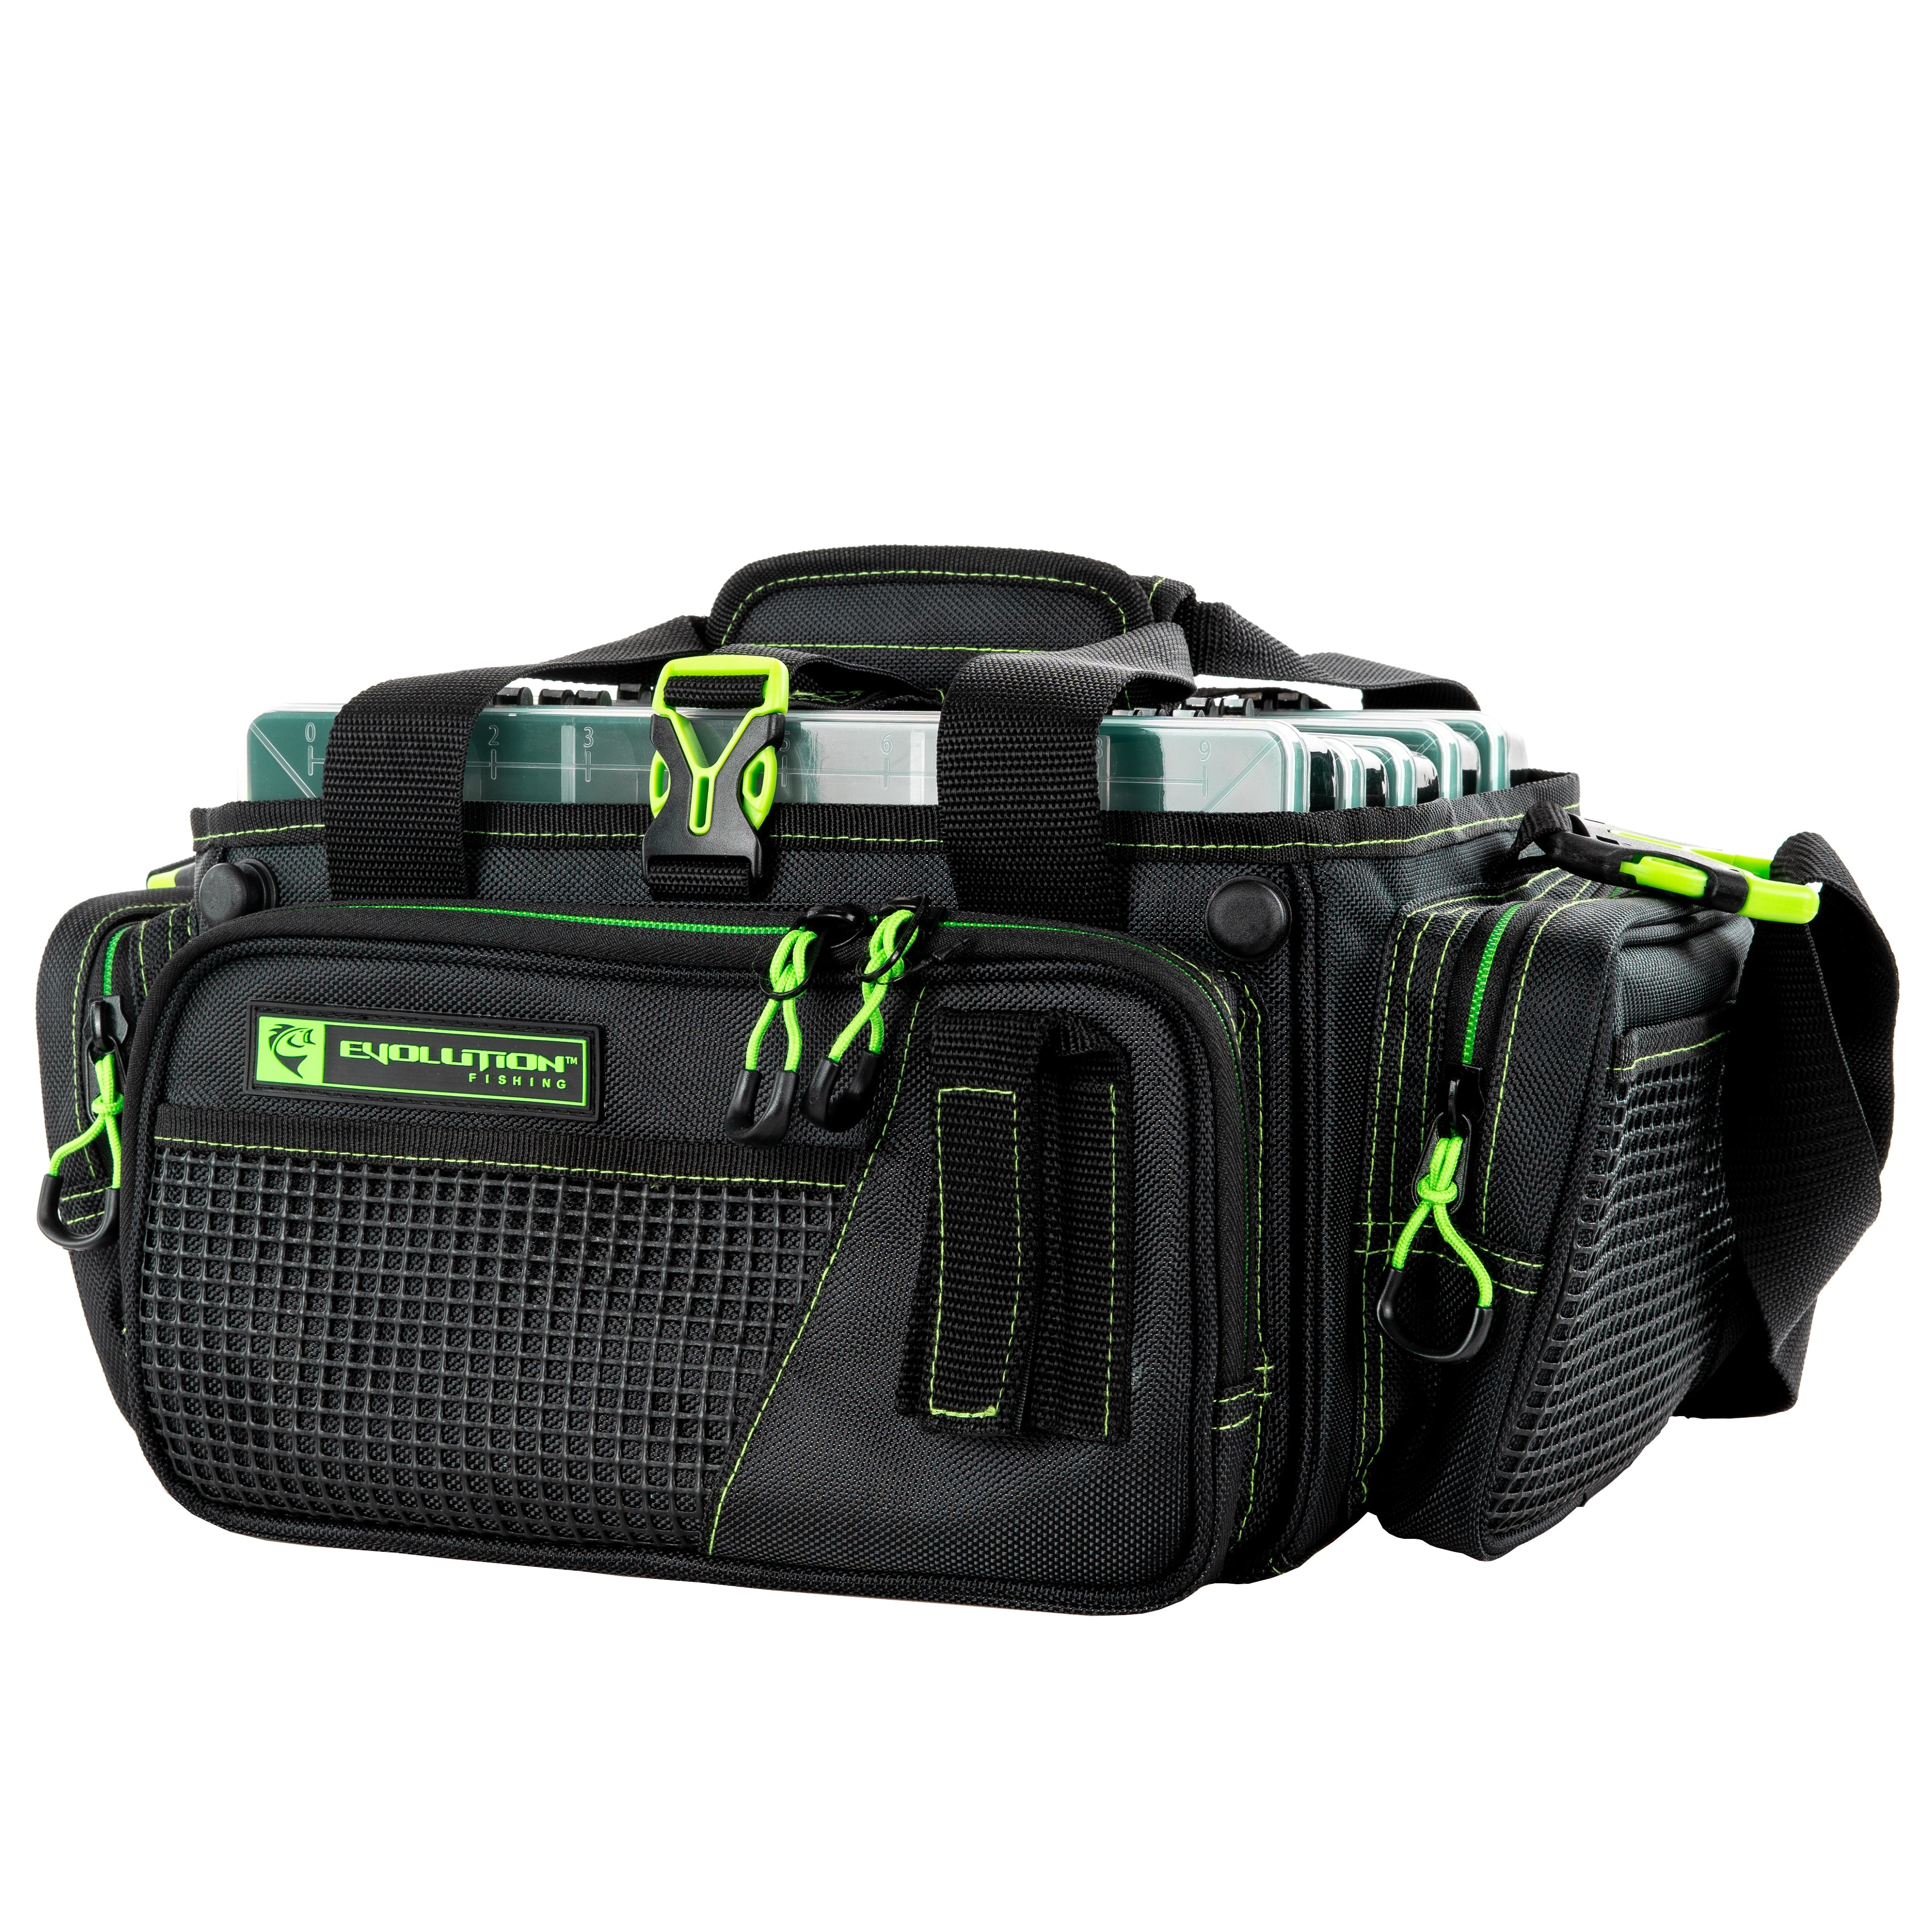 3600 Smallmouth Tackle Bag w/ 3 Trays by Evolution Outdoor at